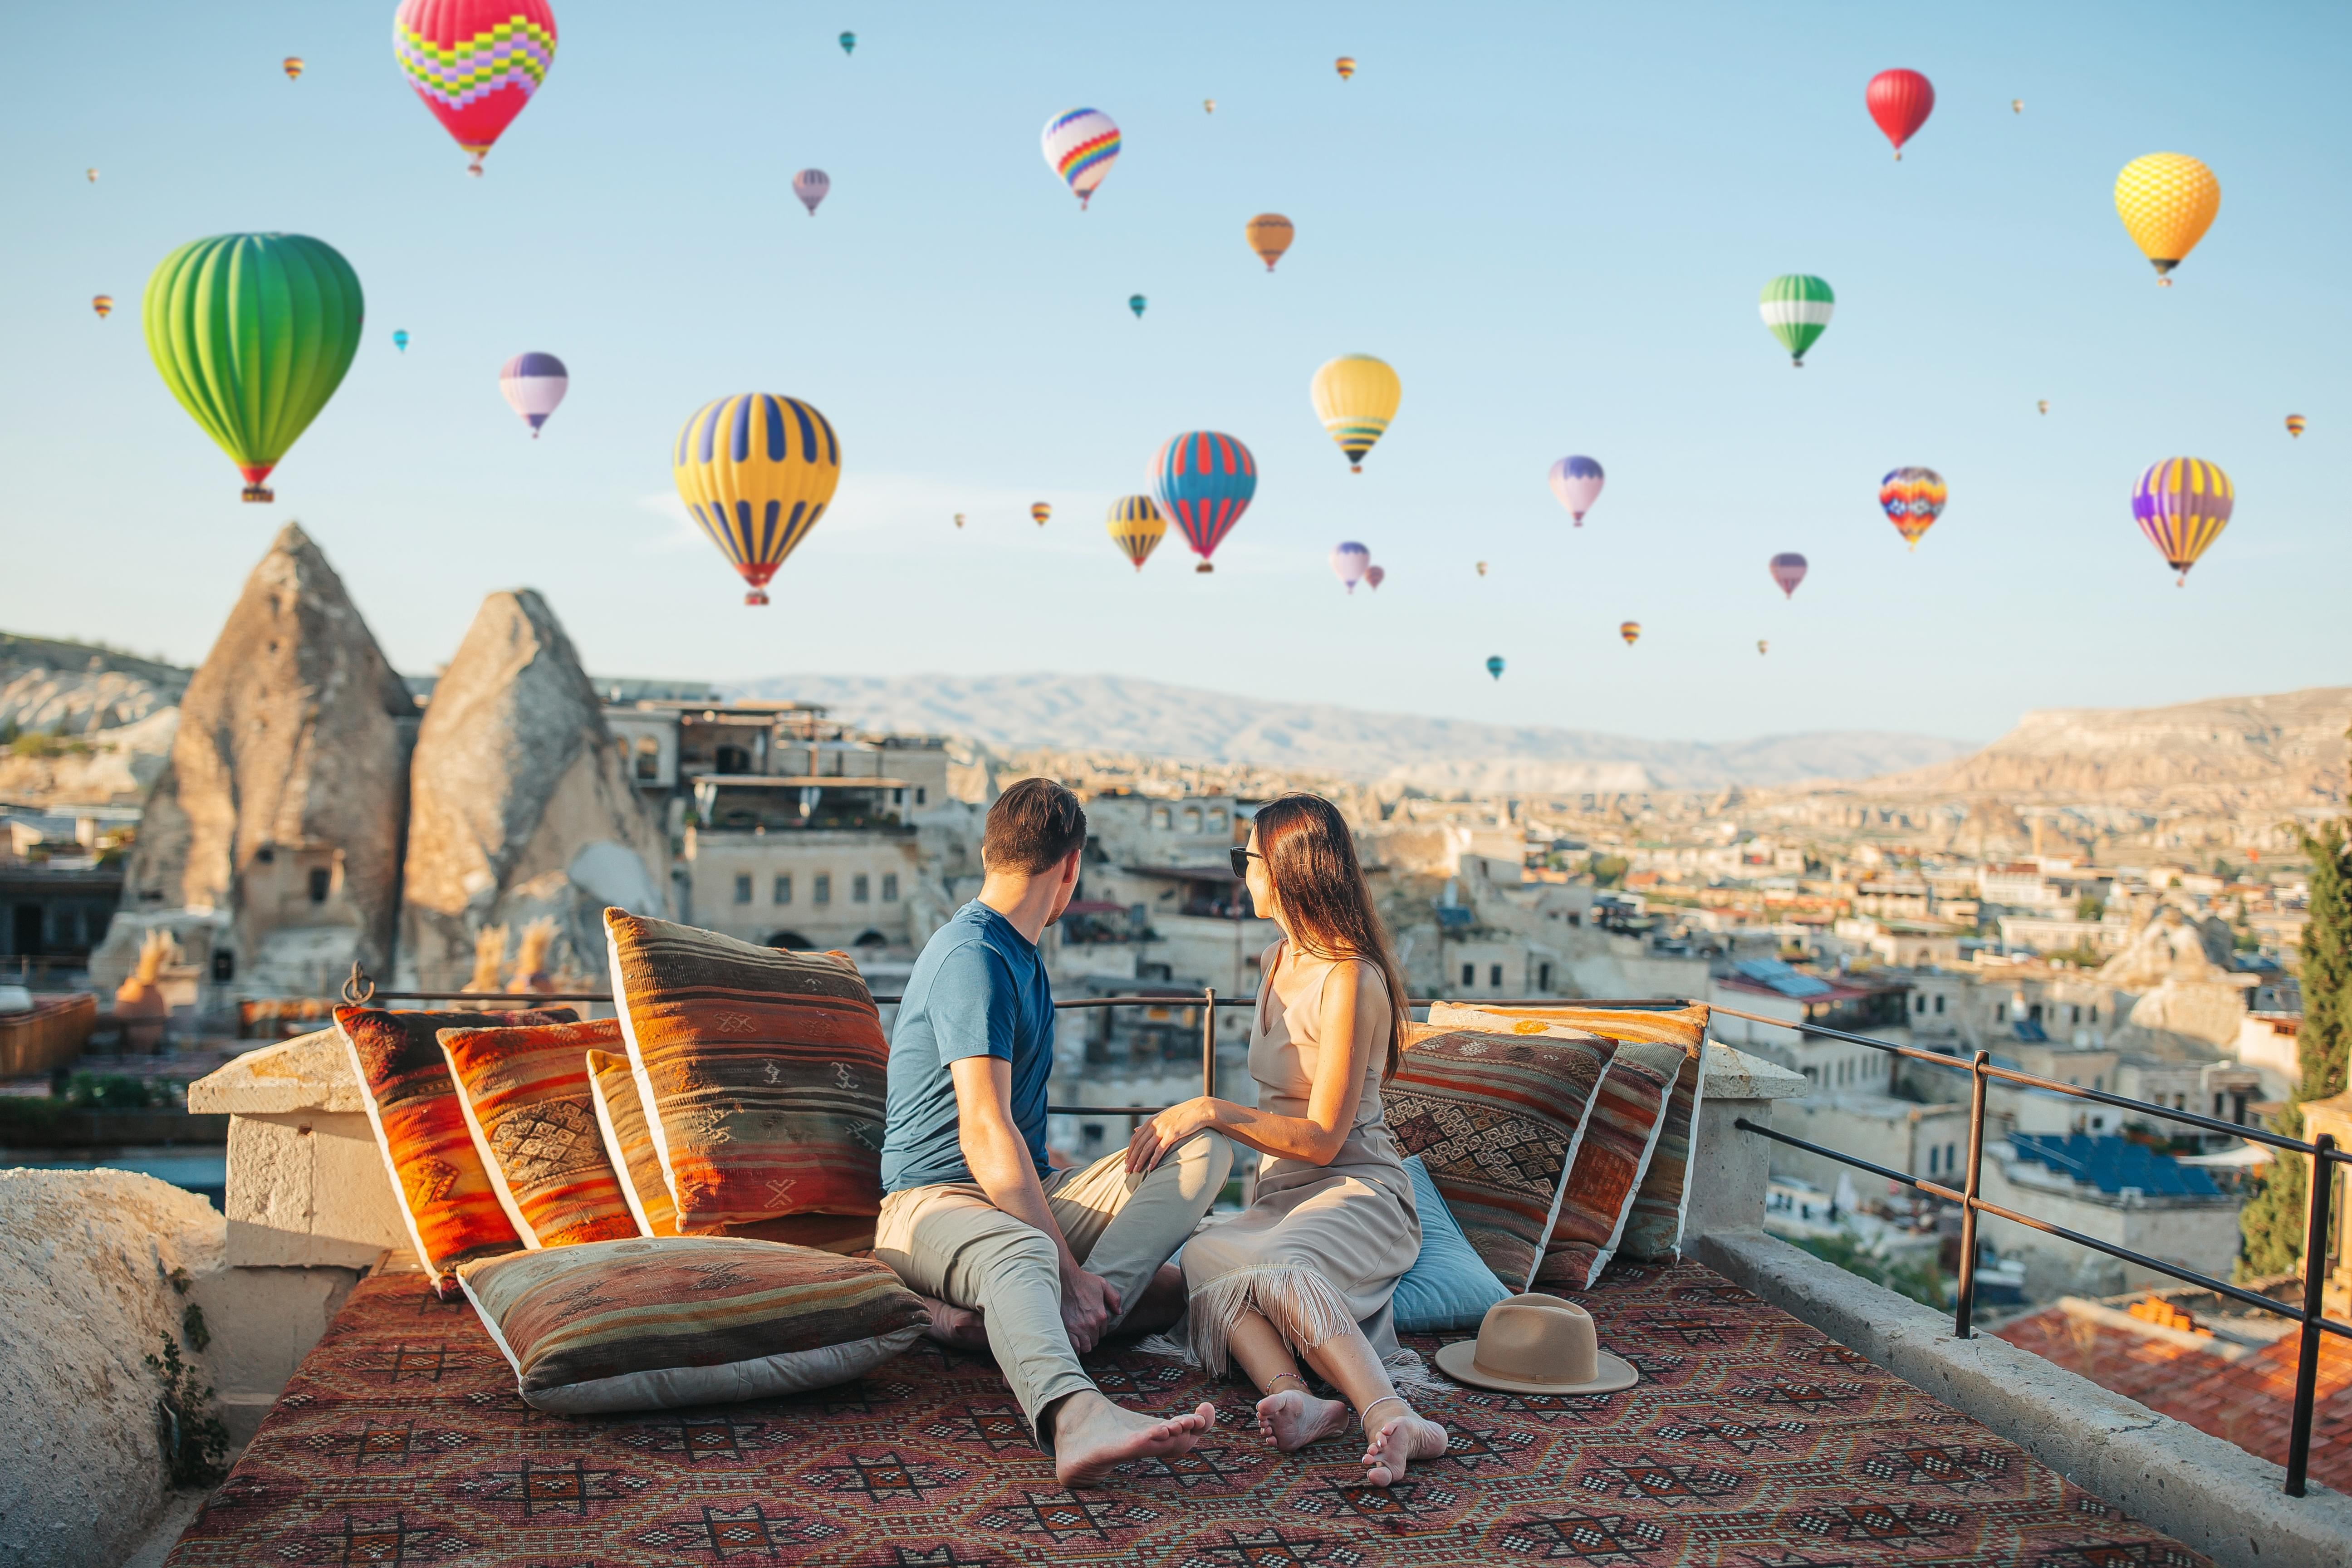 Hot air balloons soaring over the picturesque landscape of Cappadocia